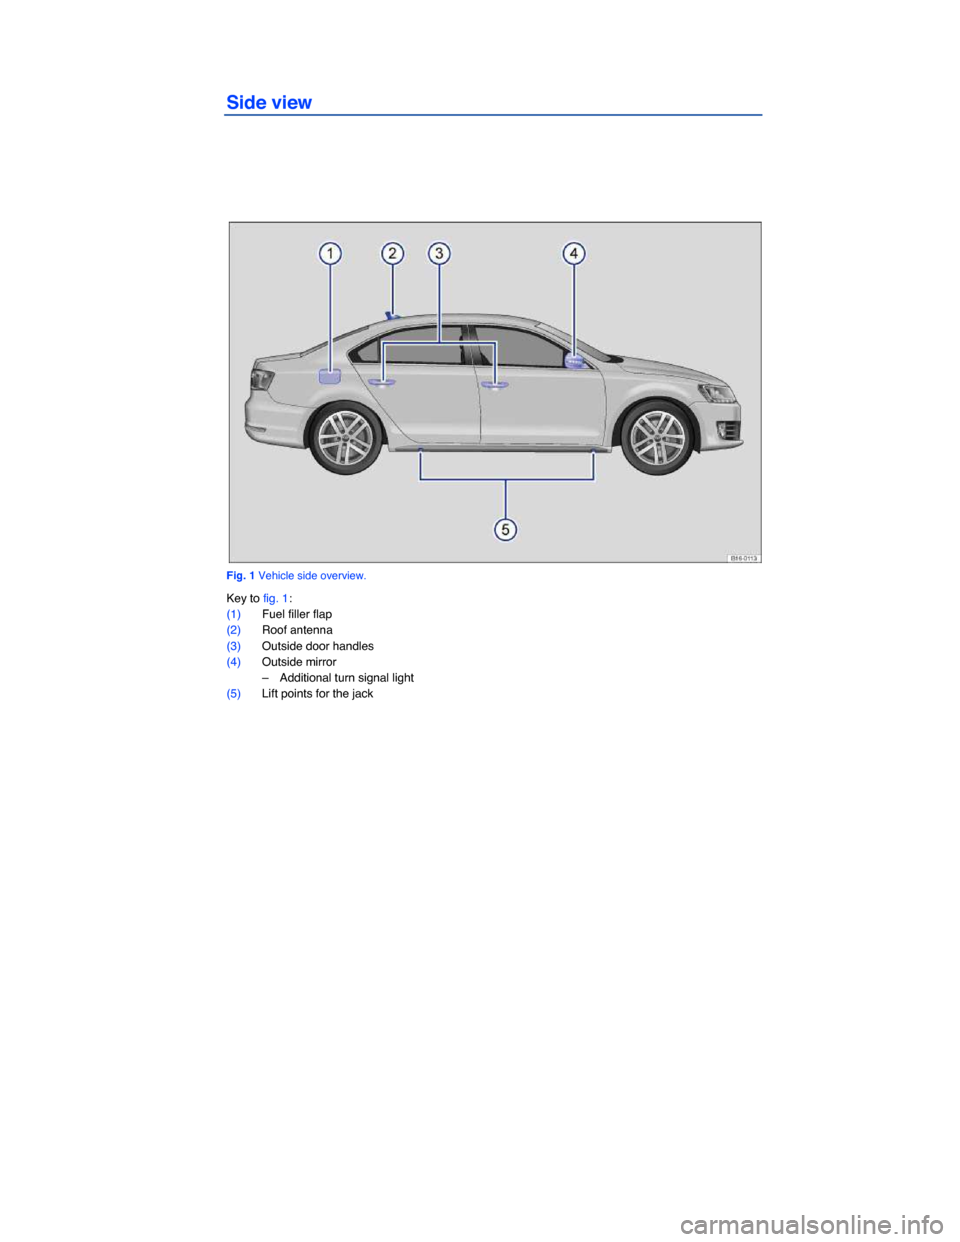 VOLKSWAGEN JETTA GLI 2014 1B / 6.G Owners Manual  
 
Side view 
 
Fig. 1 Vehicle side overview. 
Key to fig. 1: 
(1) Fuel filler flap  
(2) Roof antenna  
(3) Outside door handles  
(4) Outside mirror  
–  Additional turn signal light  
(5) Lift p